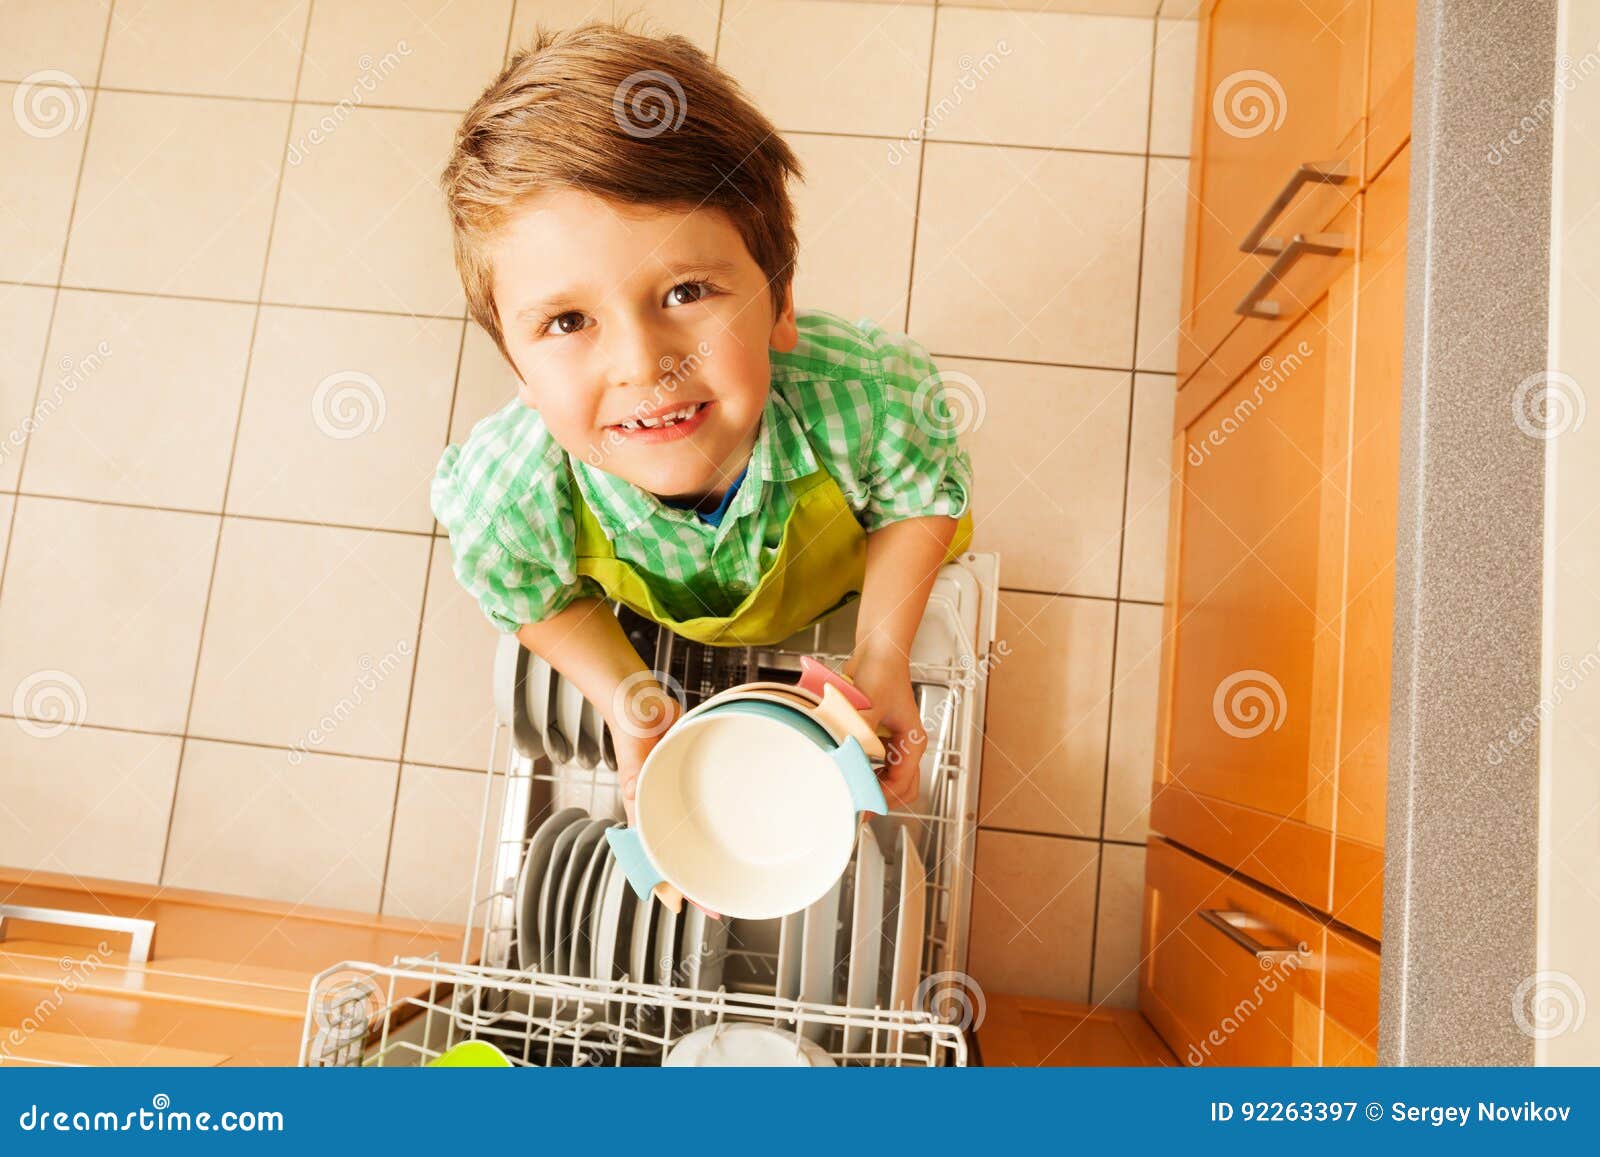 cute boy holding bowls standing next to dishwasher